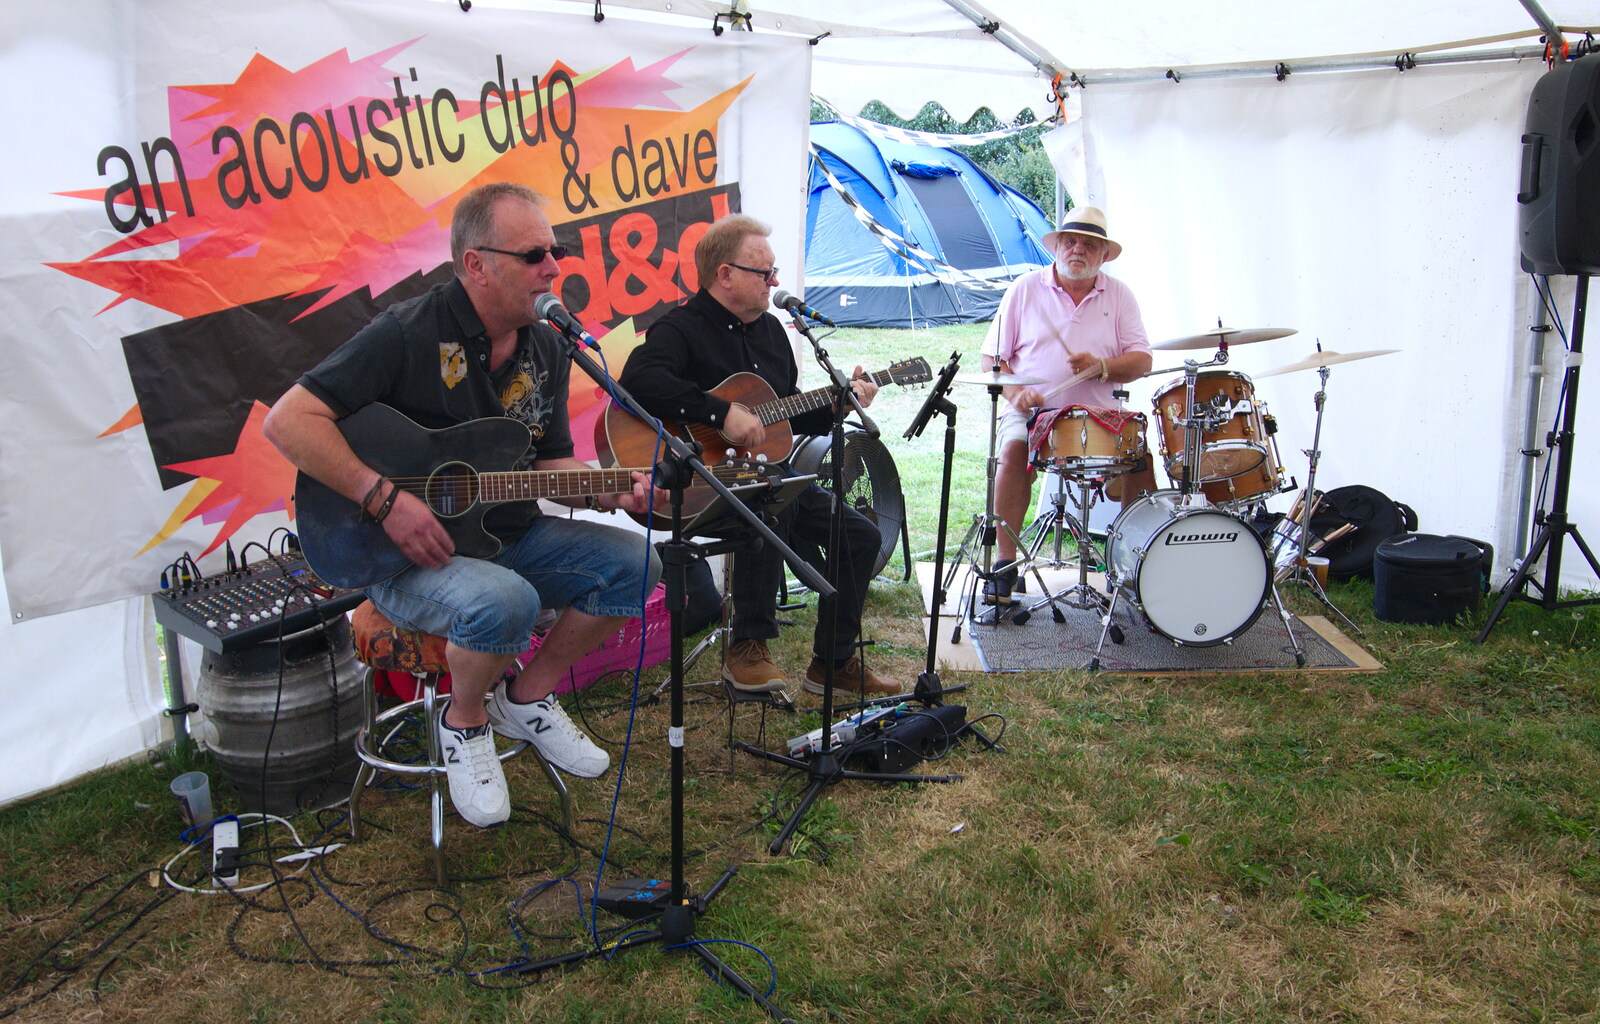 An acoustic duo and Dave, apparently from Waxham Sands and the Nelson Head Beer Festival, Horsey, Norfolk - 31st August 2019